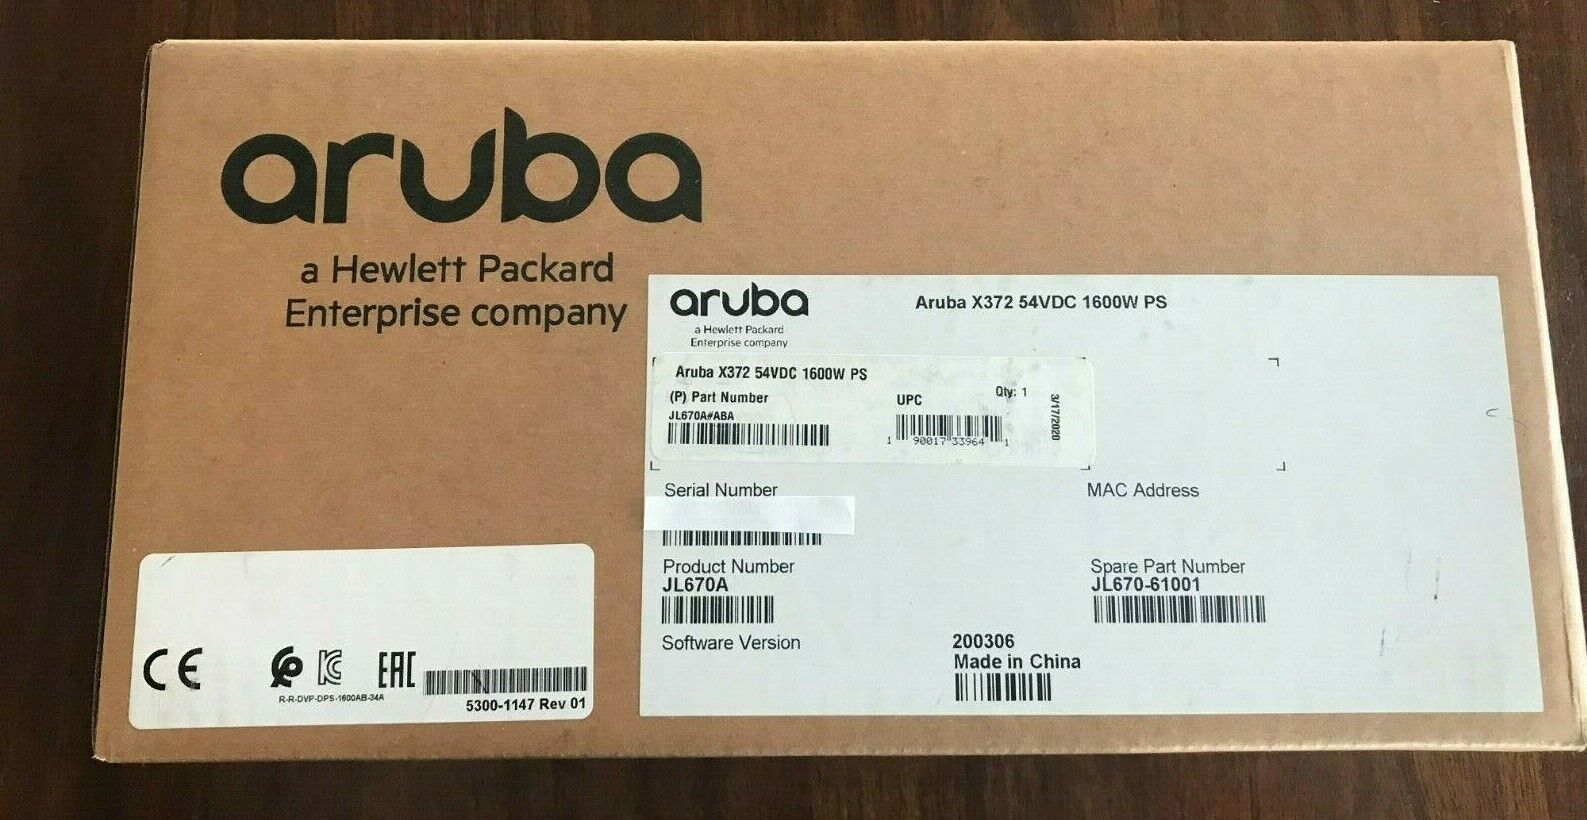 JL670A HPE Aruba X372 54VDC 1600W PS Brand new Sealed 19 availables ready toship